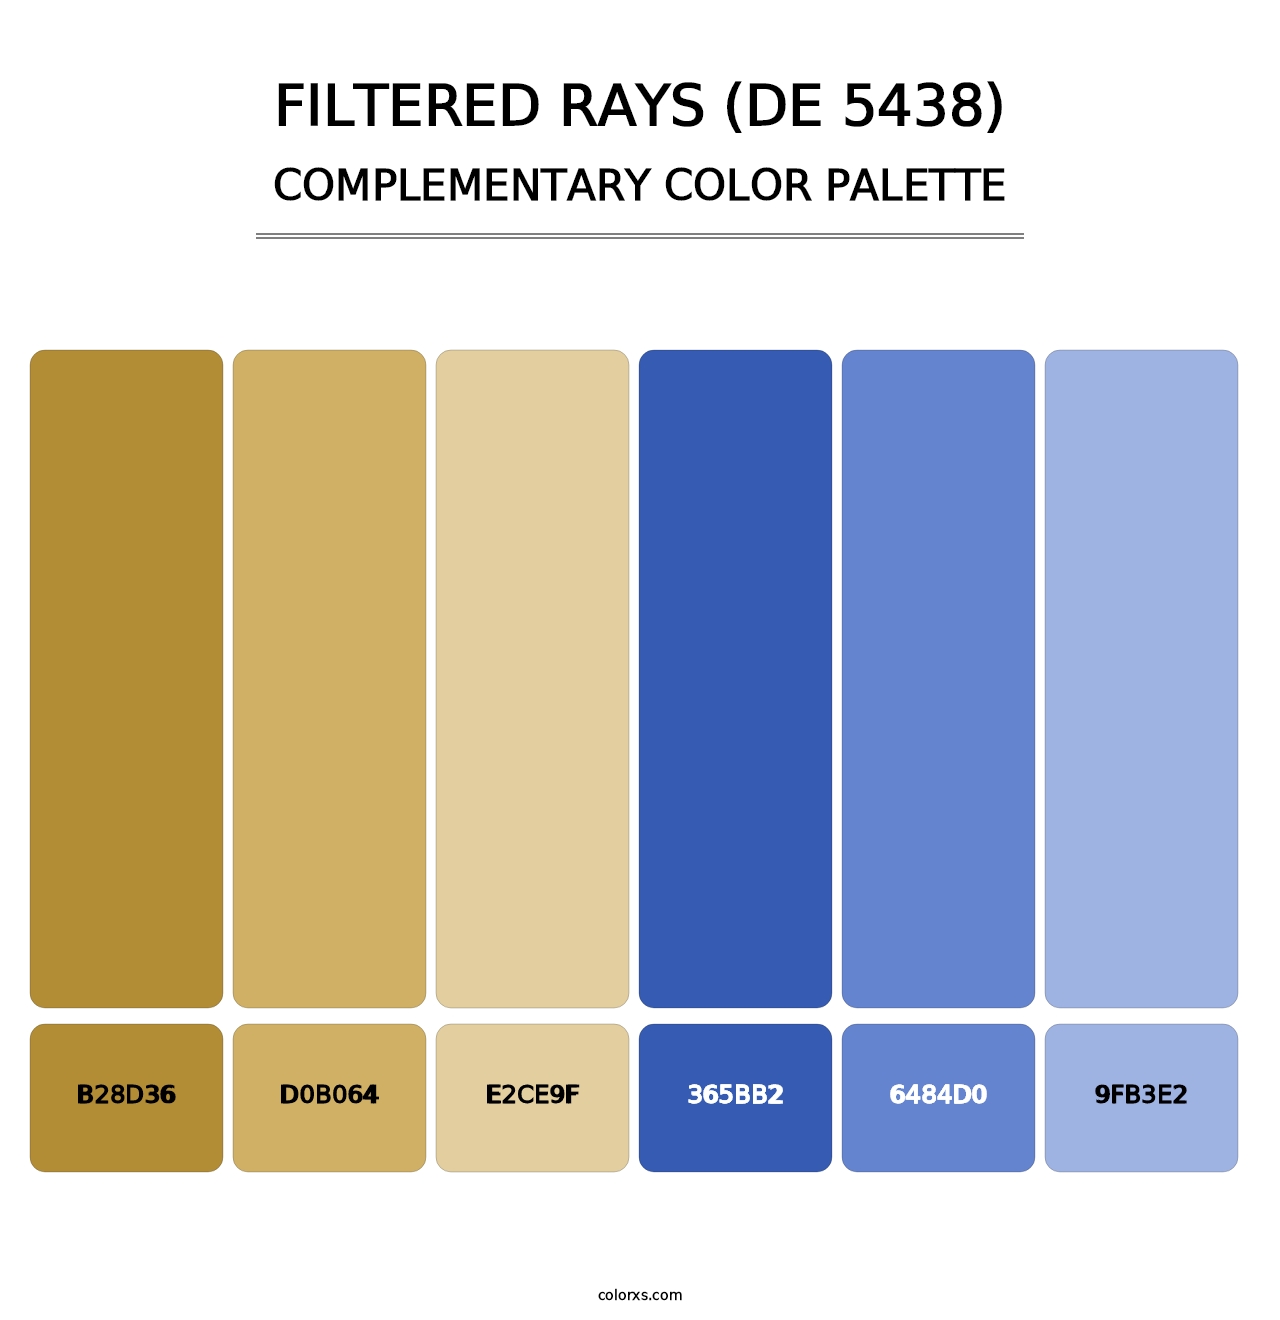 Filtered Rays (DE 5438) - Complementary Color Palette